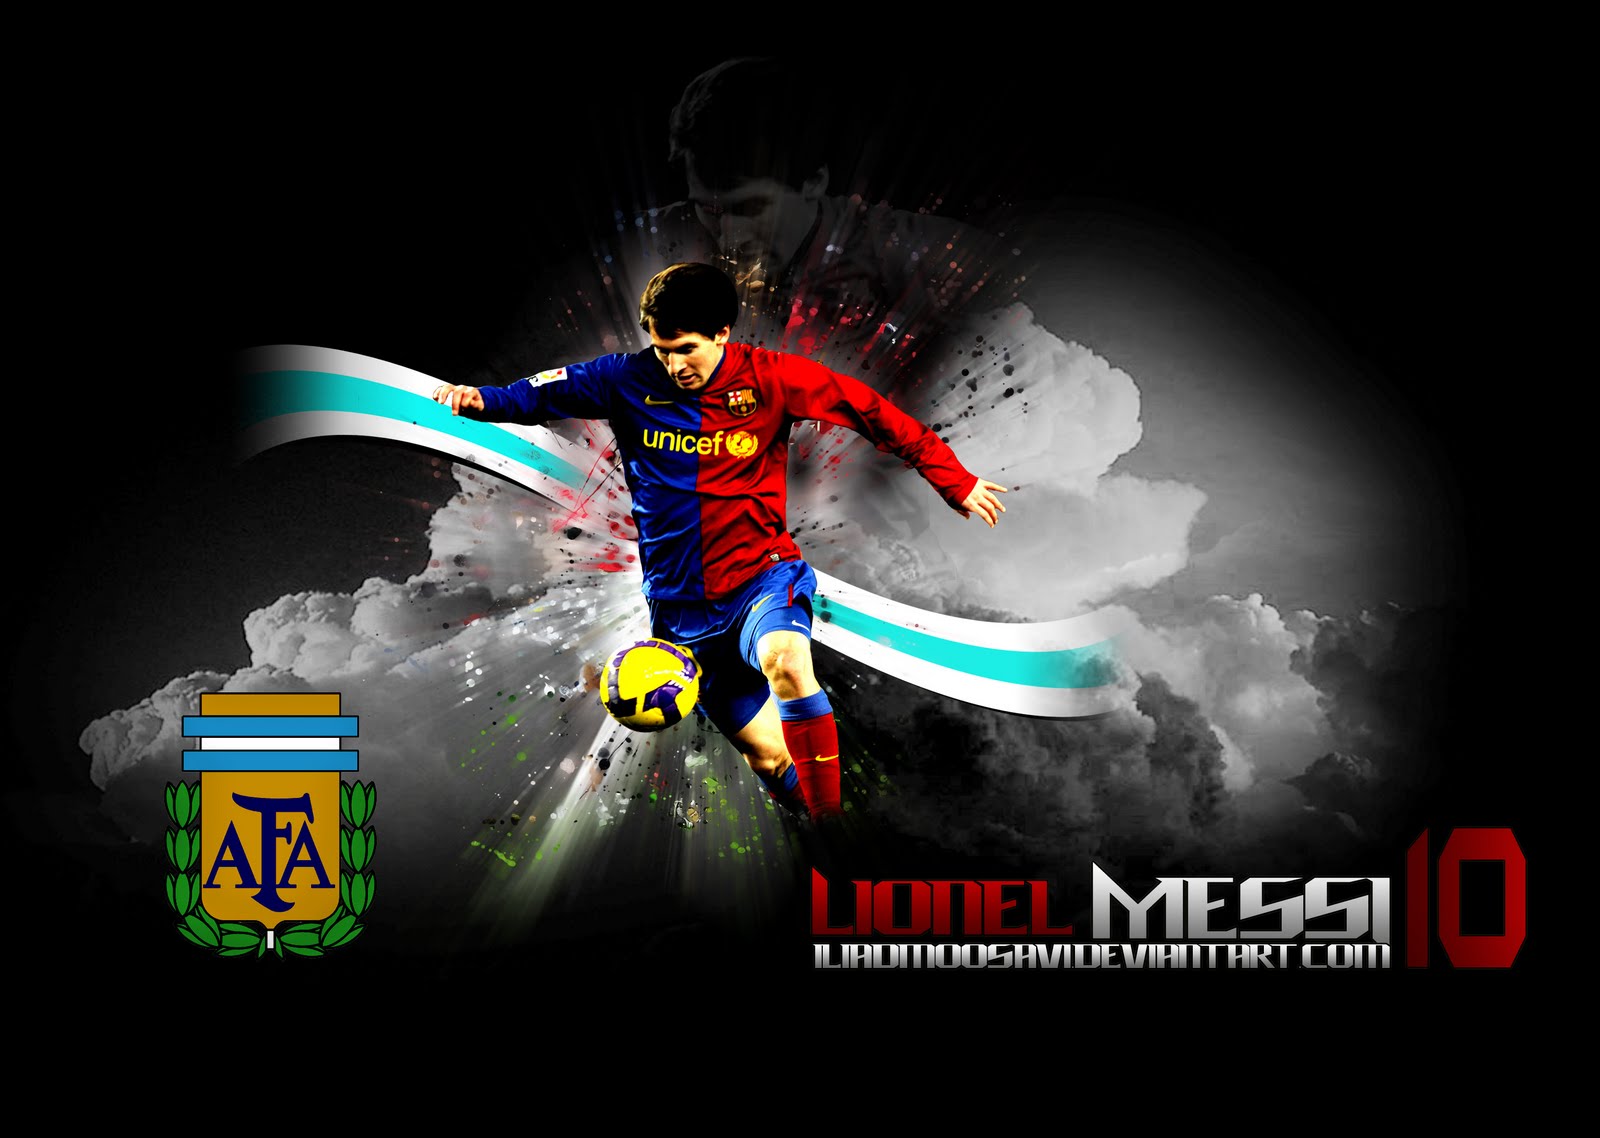  other wallpapers of Lionel Messi wallpapers 10 as often as possible